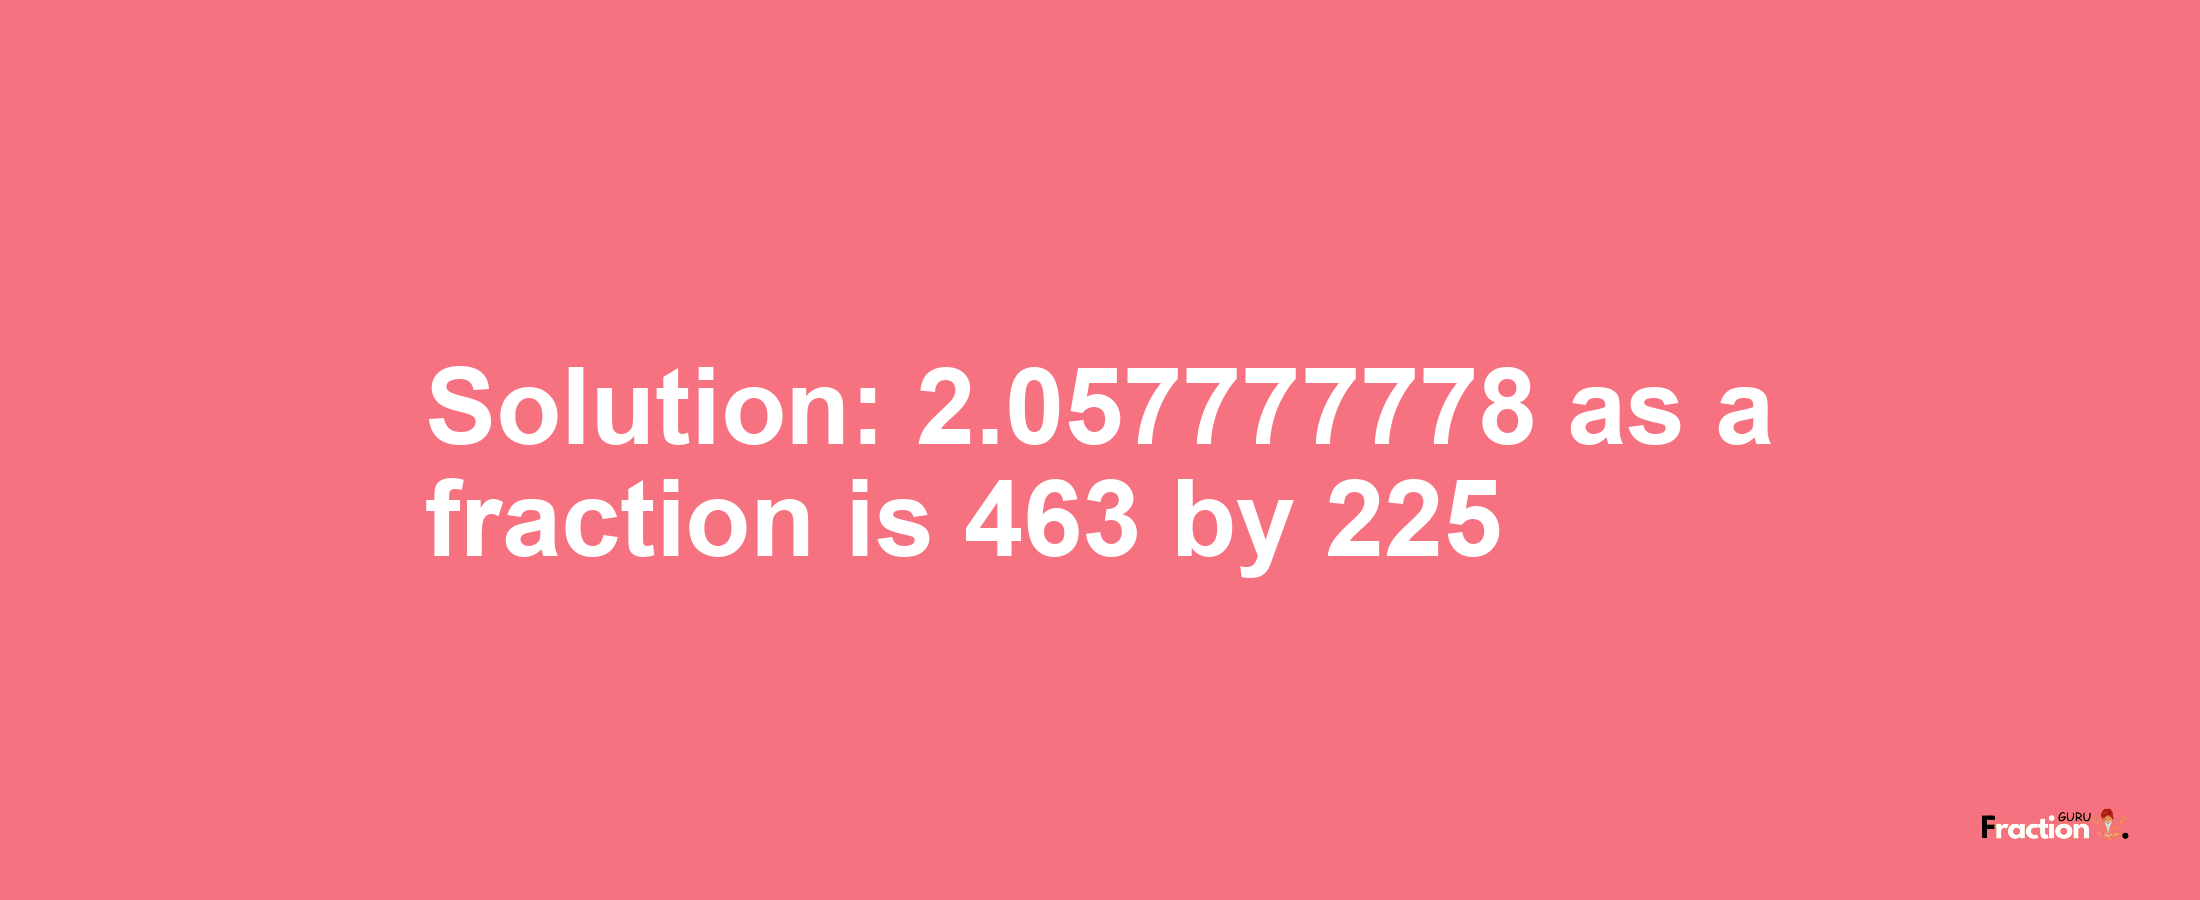 Solution:2.057777778 as a fraction is 463/225